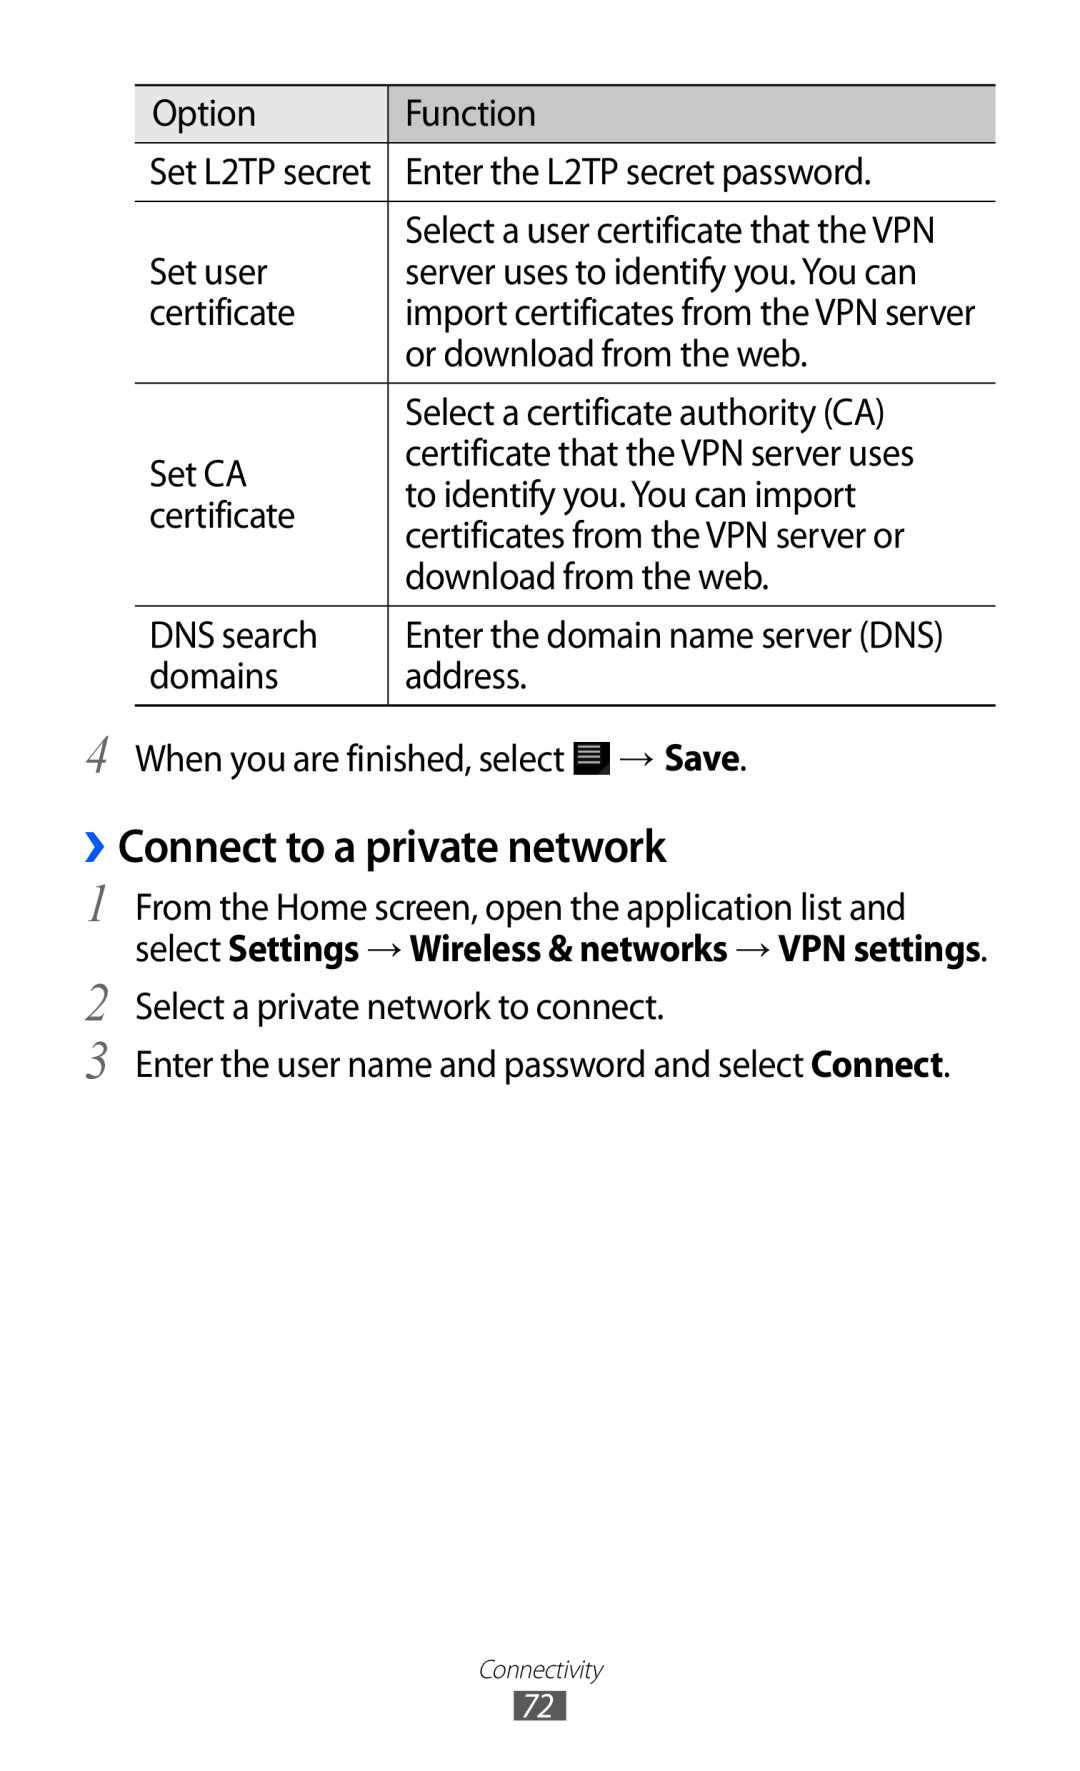 Samsung GT-P7510 ››Connect to a private network, Select a user certificate that the VPN, Enter the domain name server DNS 